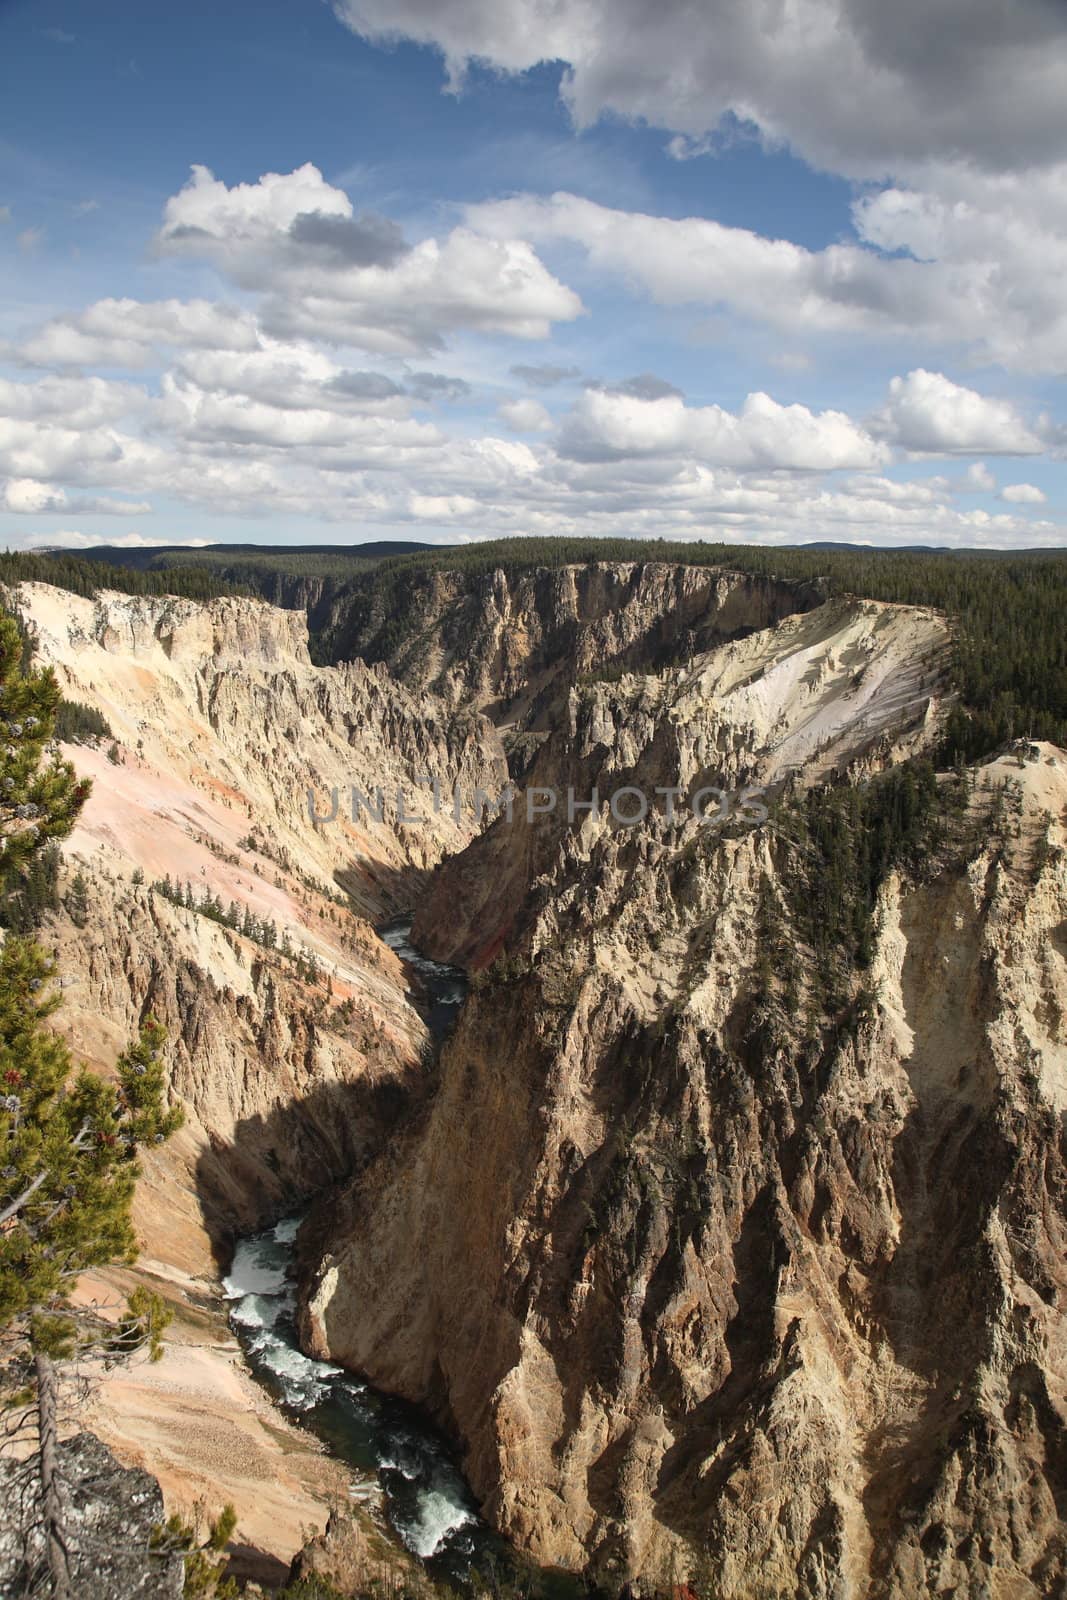 Landmark view of river and cliffs in Yellowstone National Park